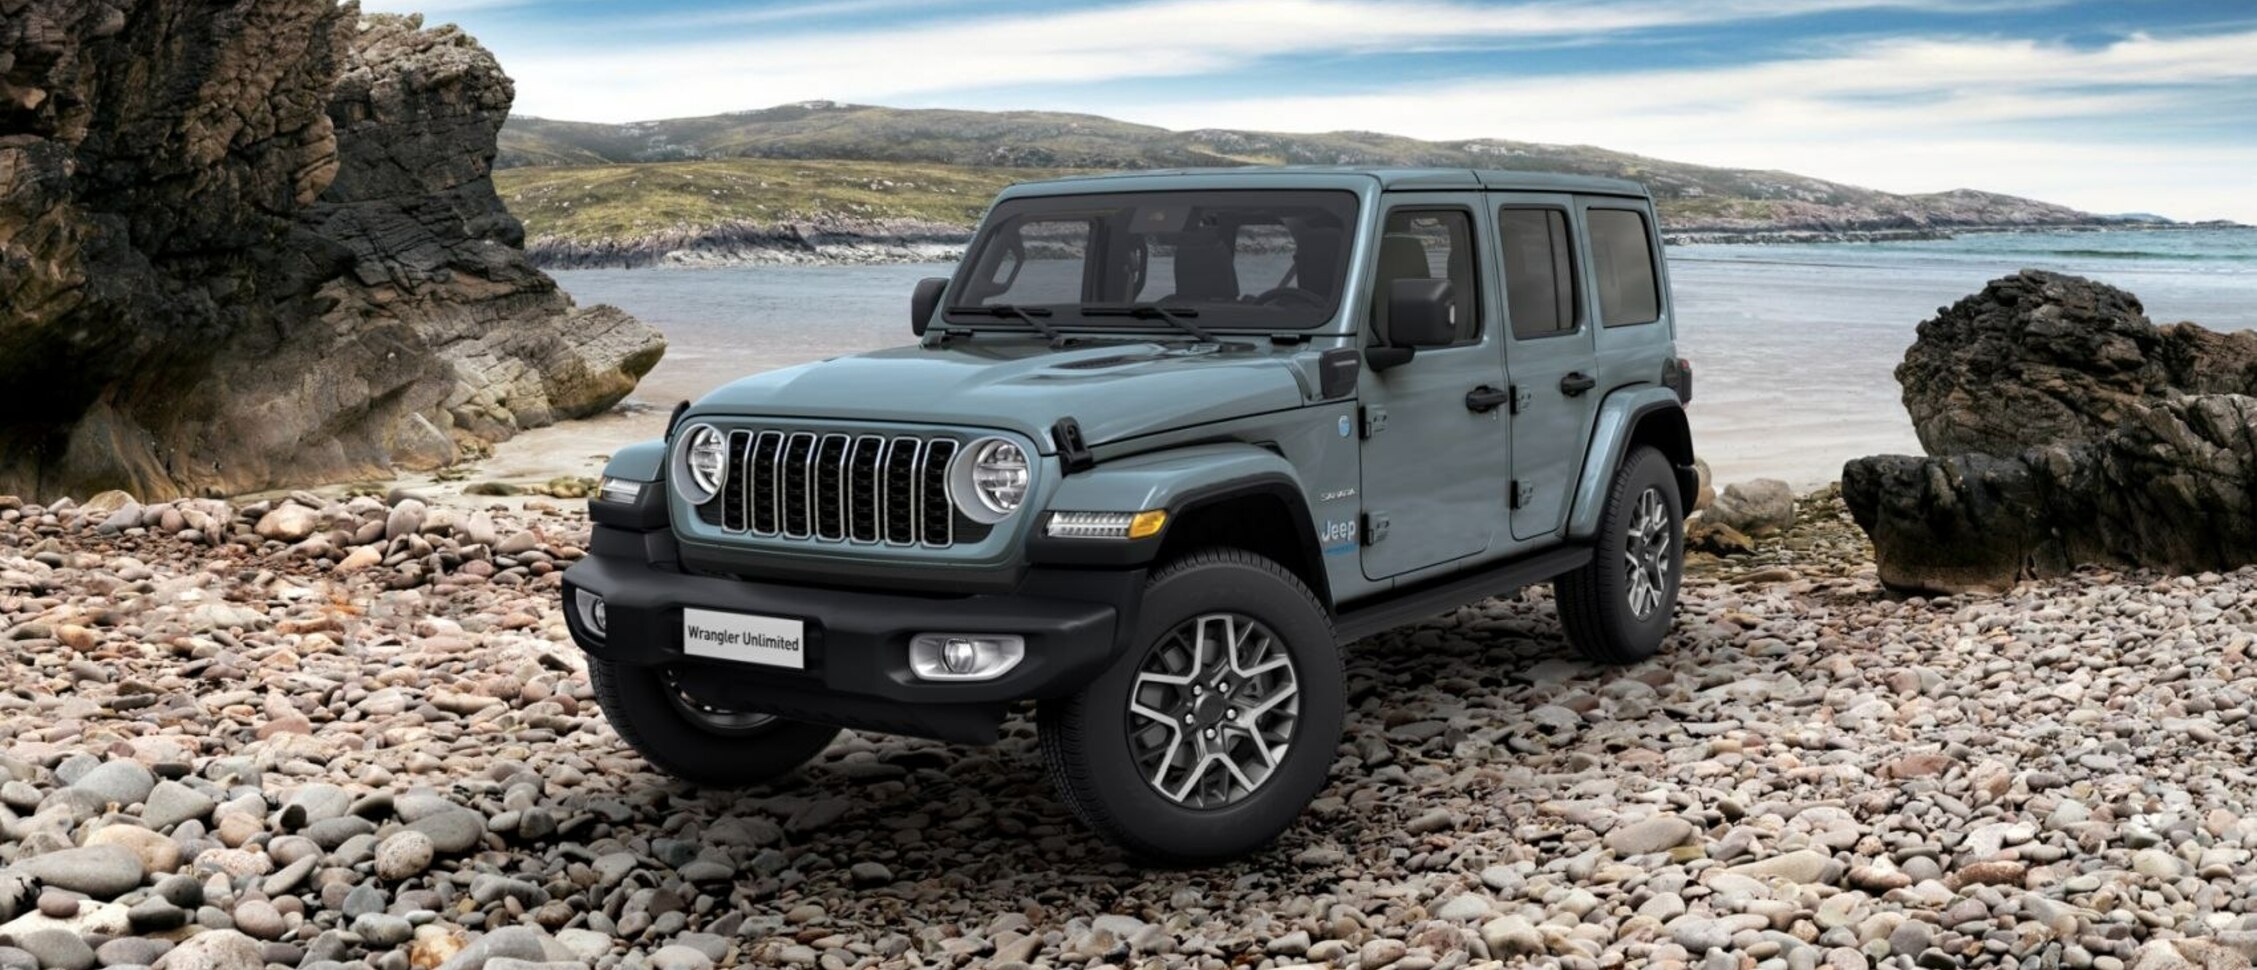 Jeep Wrangler IV Unlimited (JL, facelift 2023) Rubicon 3.6 Pentastar V6 (290 Hp) 4WD Automatic 2023